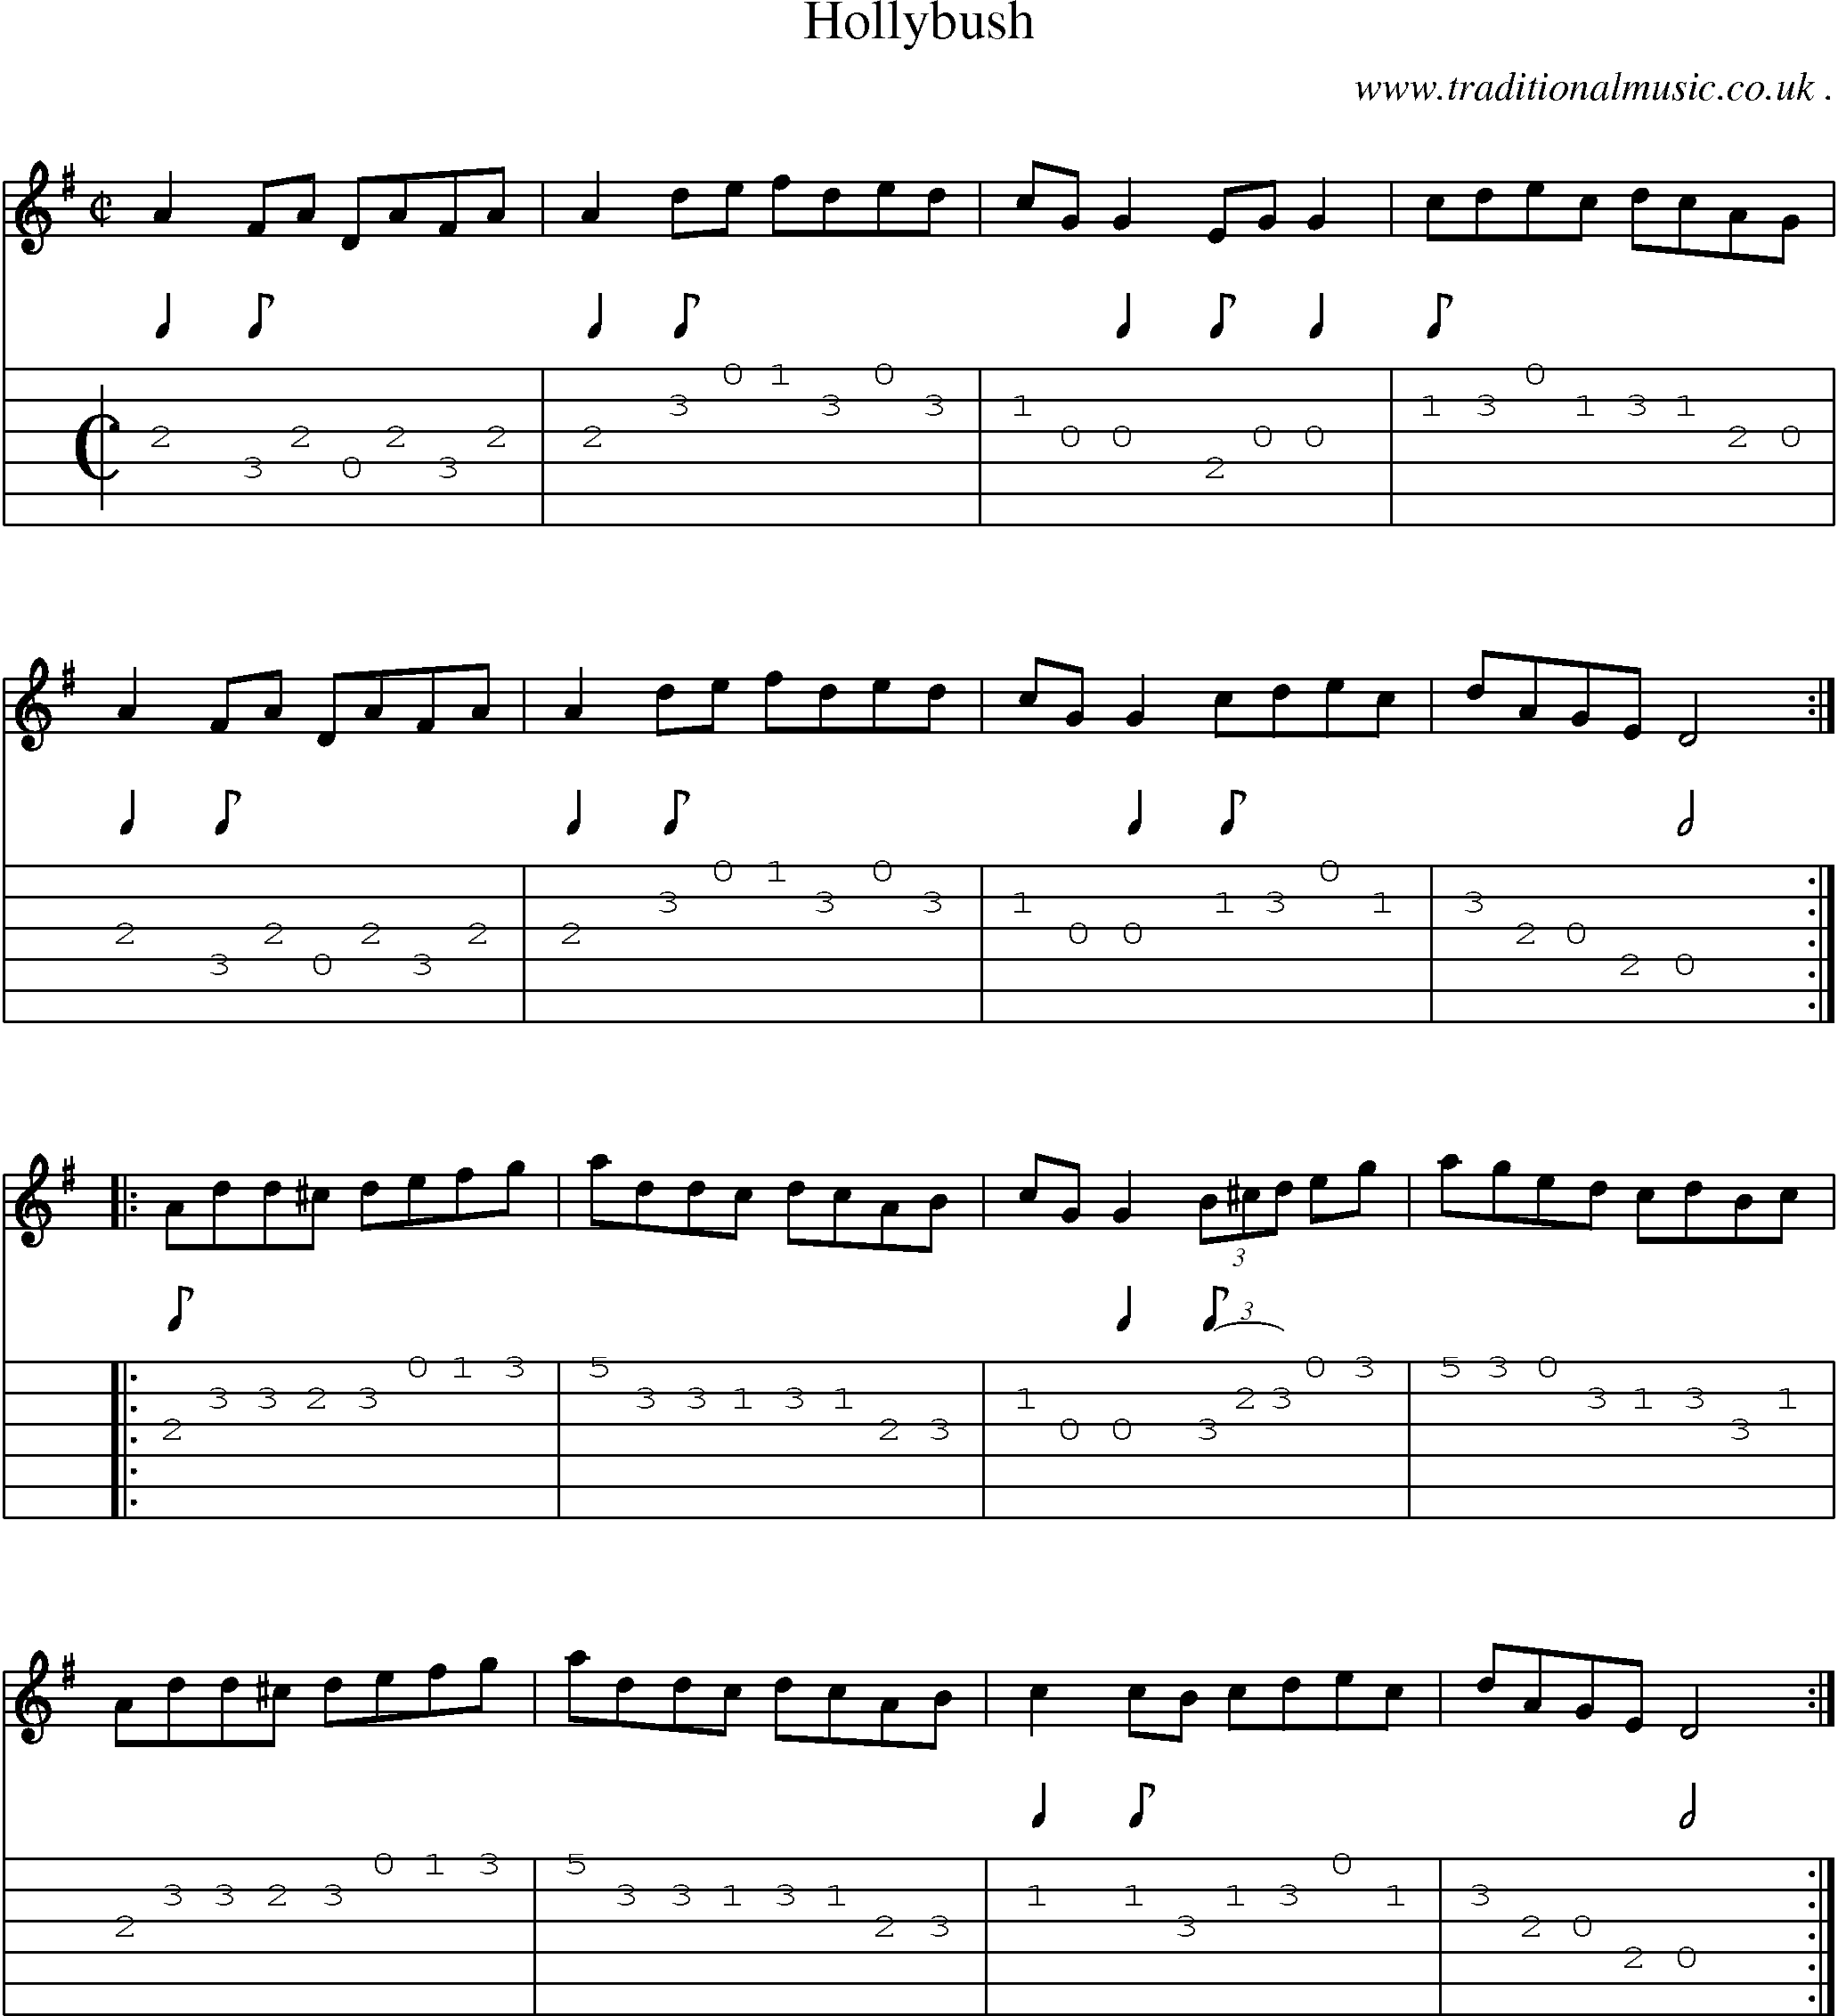 Sheet-Music and Guitar Tabs for Hollybush